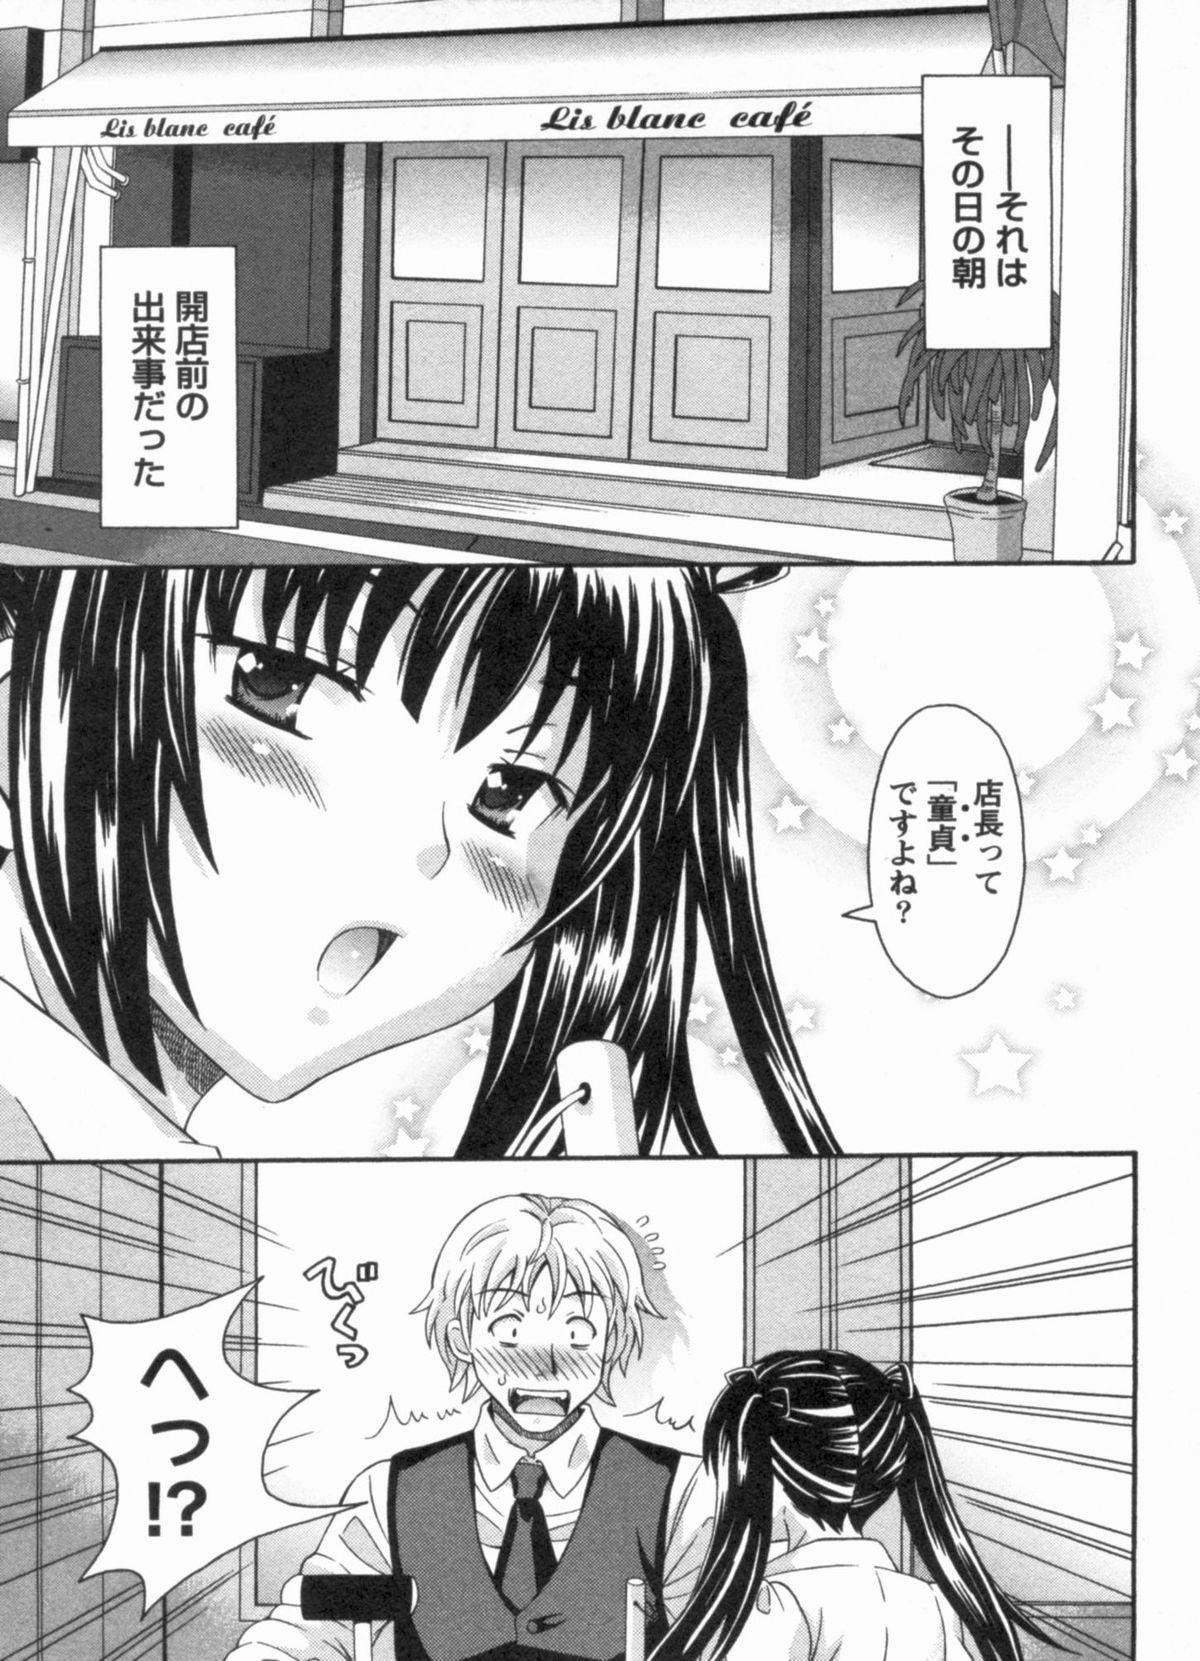 Phat Koi Cafe ni Youkoso!! 1 - Welcome to Love&cafe!! 1 Secretary - Page 11